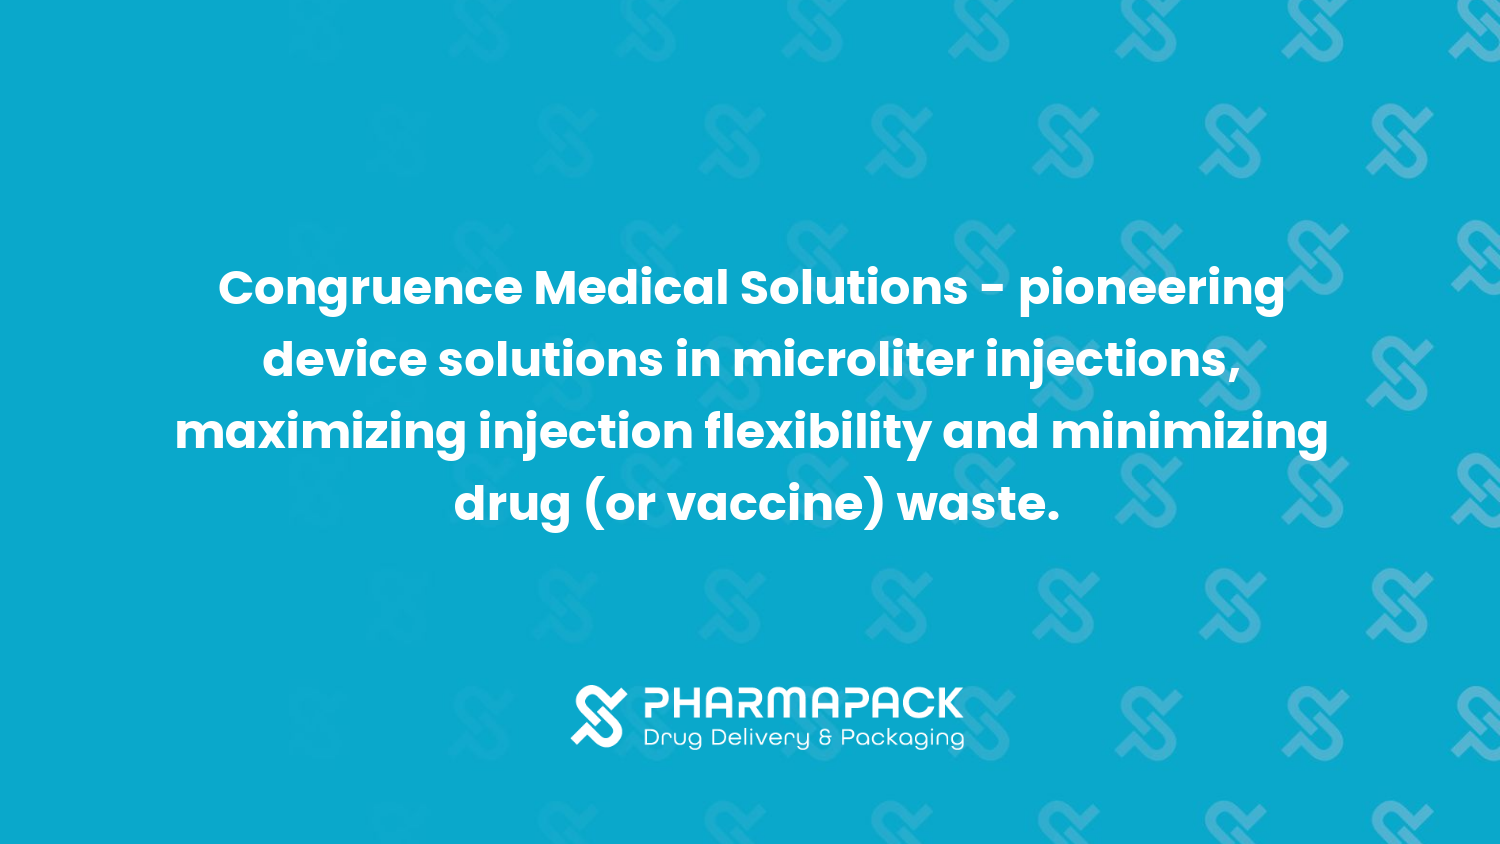 Pioneering Device Solutions in Microliter Injections, Maximizing Injection Flexibility and Minimizing Drug (or Vaccine) Waste.